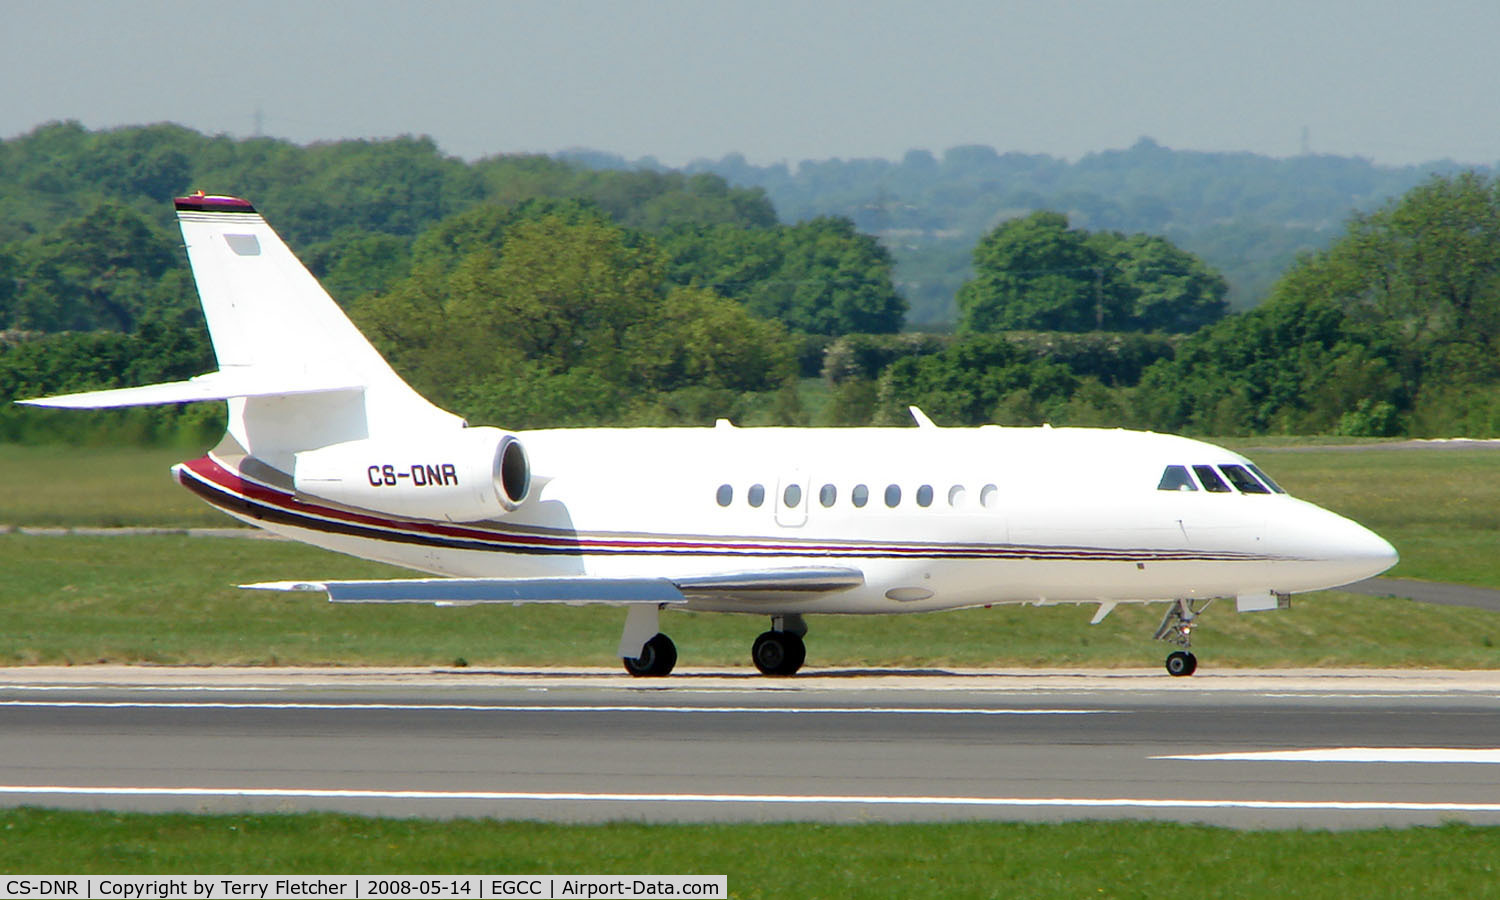 CS-DNR, 2000 Dassault Falcon 2000 C/N 120, Some of the typical traffic that can be seen at Manchester (Ringway)  International